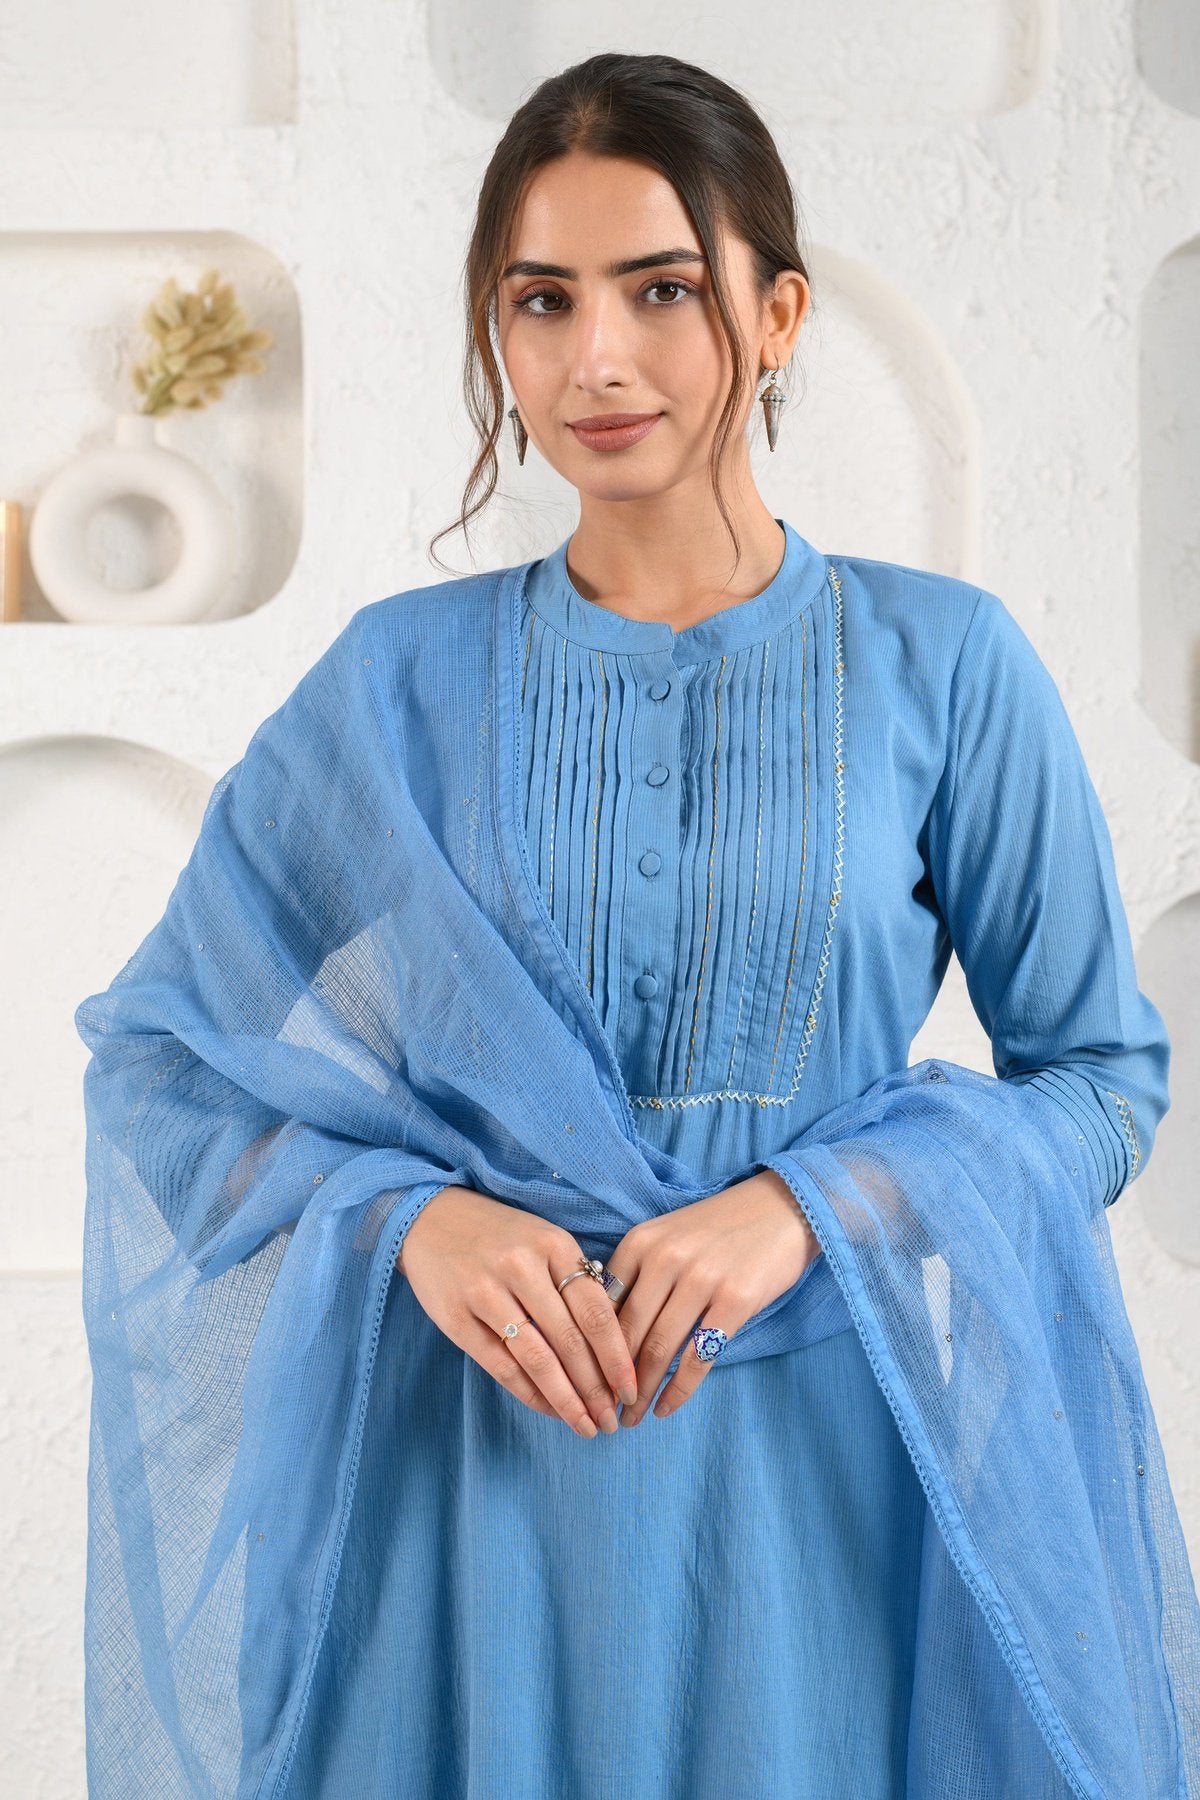 Blue Pleated Dobby Suit Set With Slip